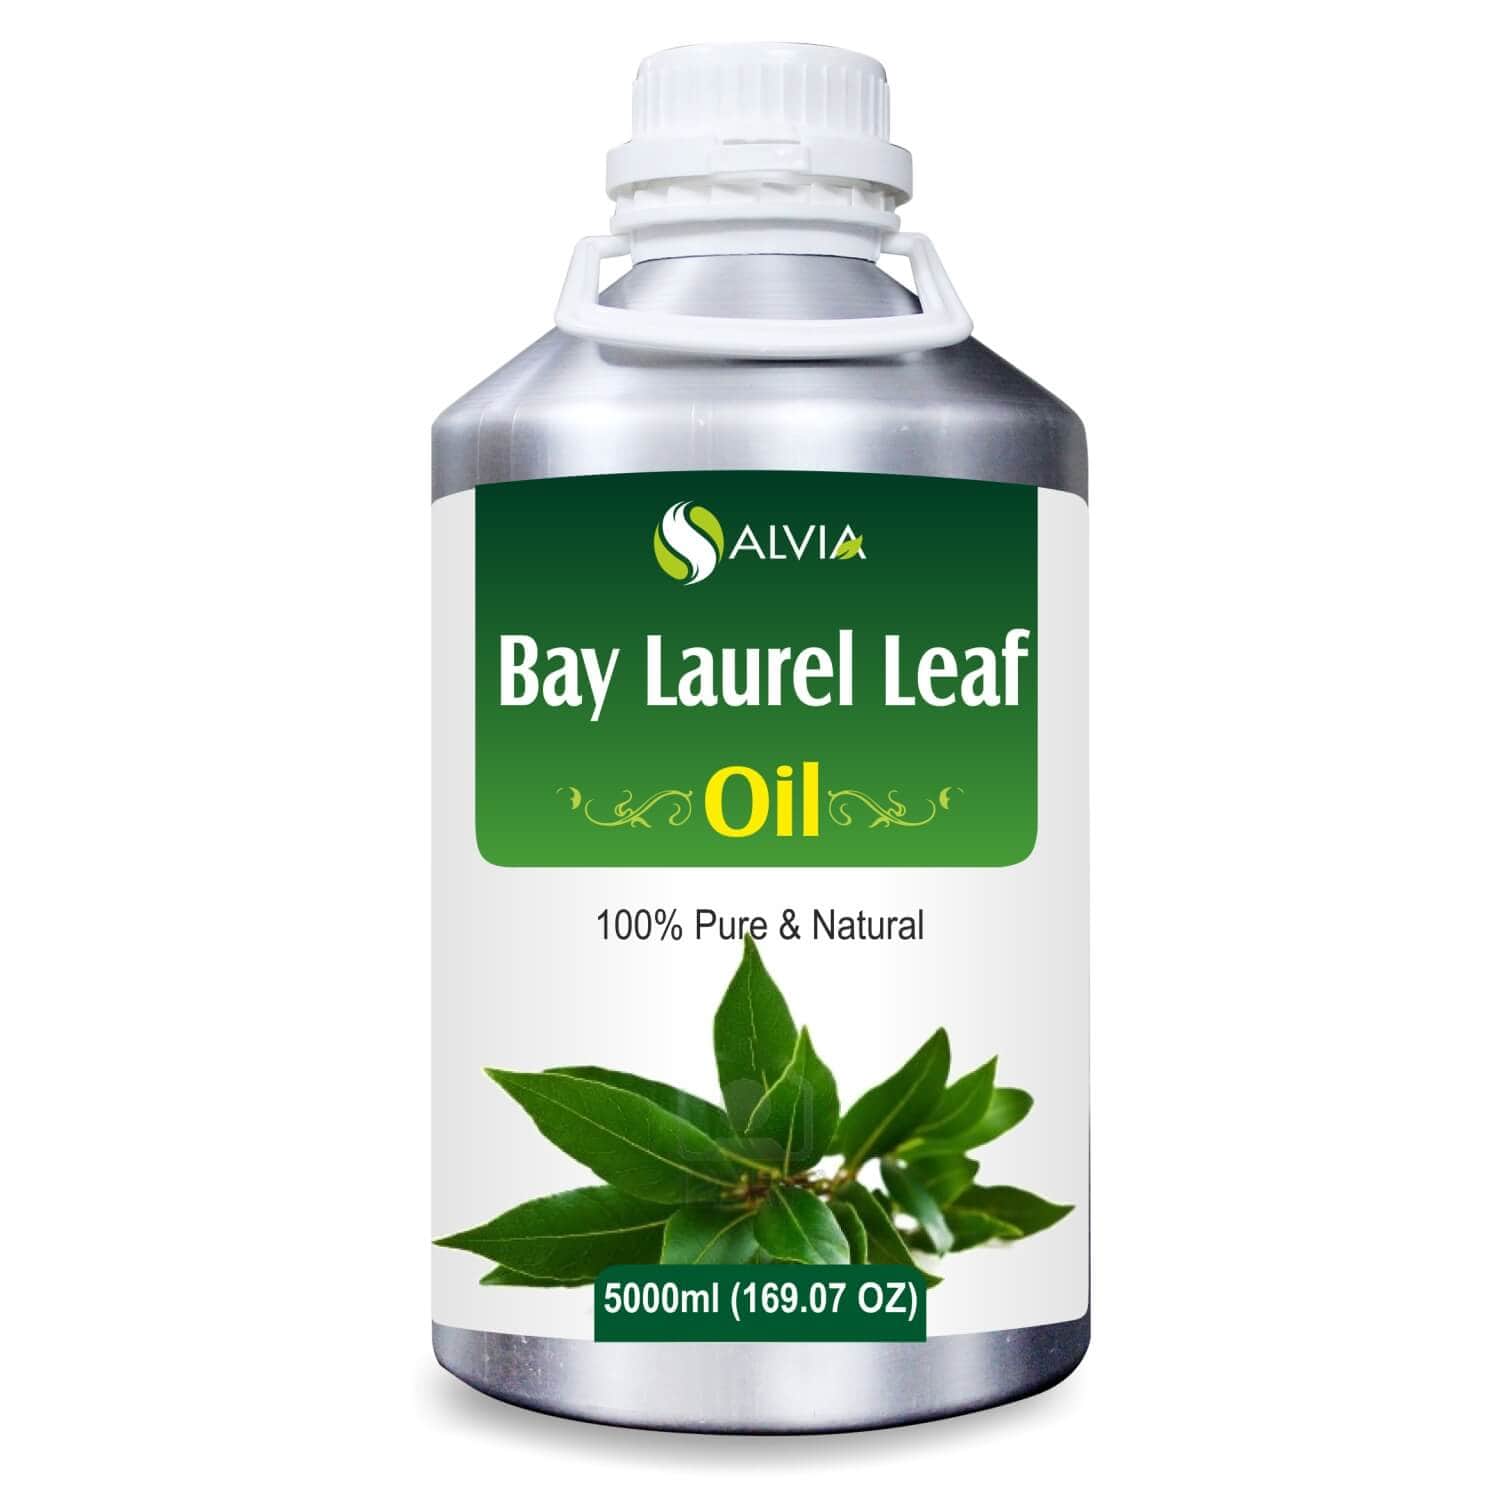 BAY LEAF FOR HAIR GROWTH AND DANDRUFF - The Natural DIY